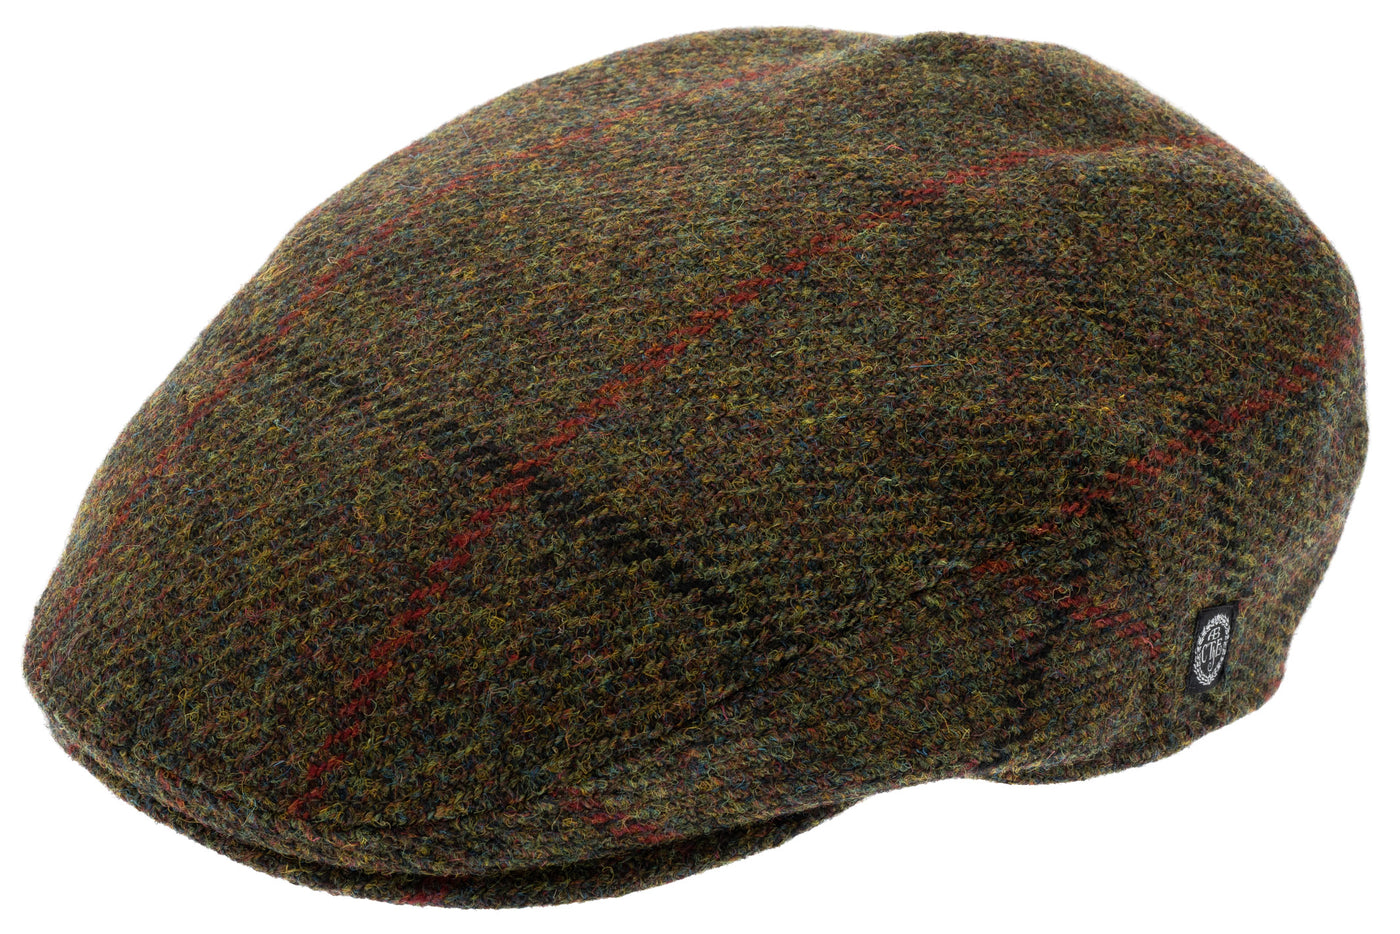 Harris tweed flat cap in green with black and red overchecks